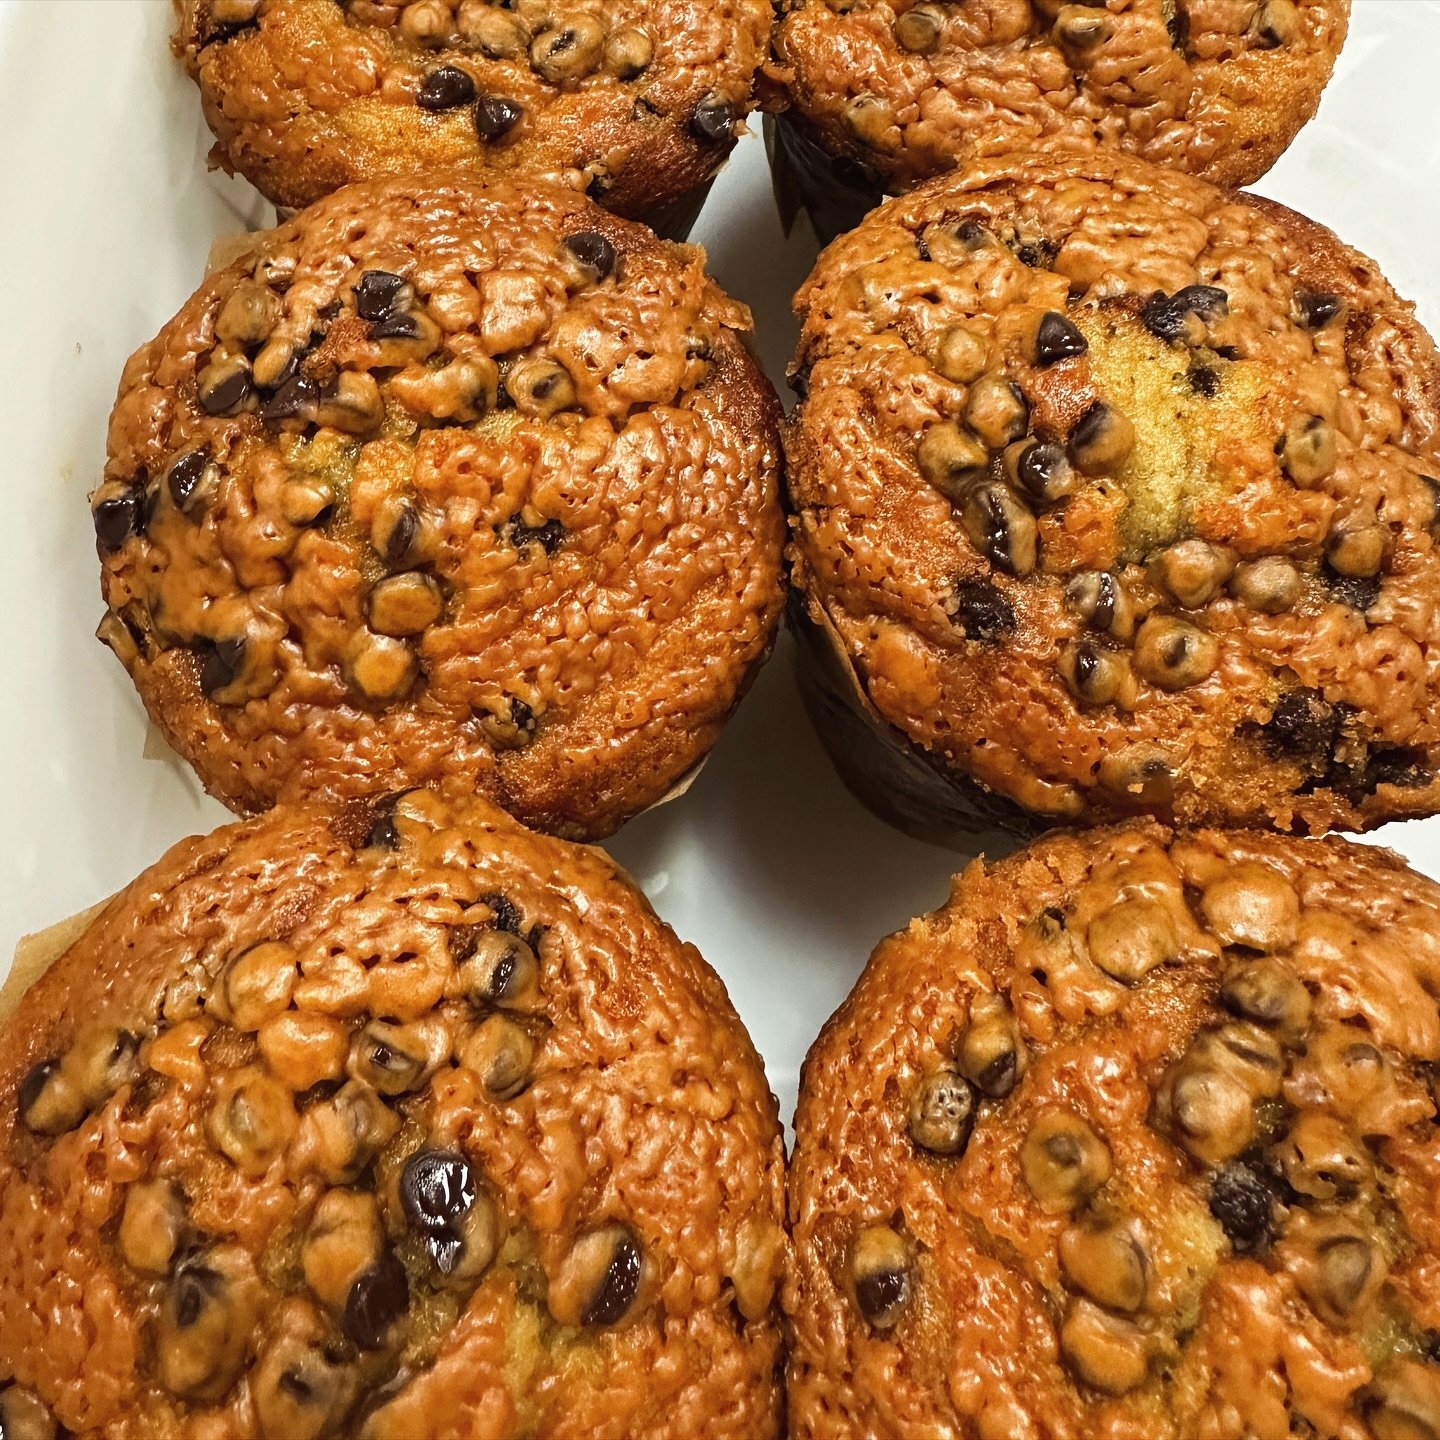 Looking for a gluten-free muffin? Try our seasonal gluten-free chocolate peanut butter banana bread muffin, which is packed with creamy peanut butter and chocolate chips for the ultimate treat ✨

*While our gluten-free muffins are made with gluten-fr